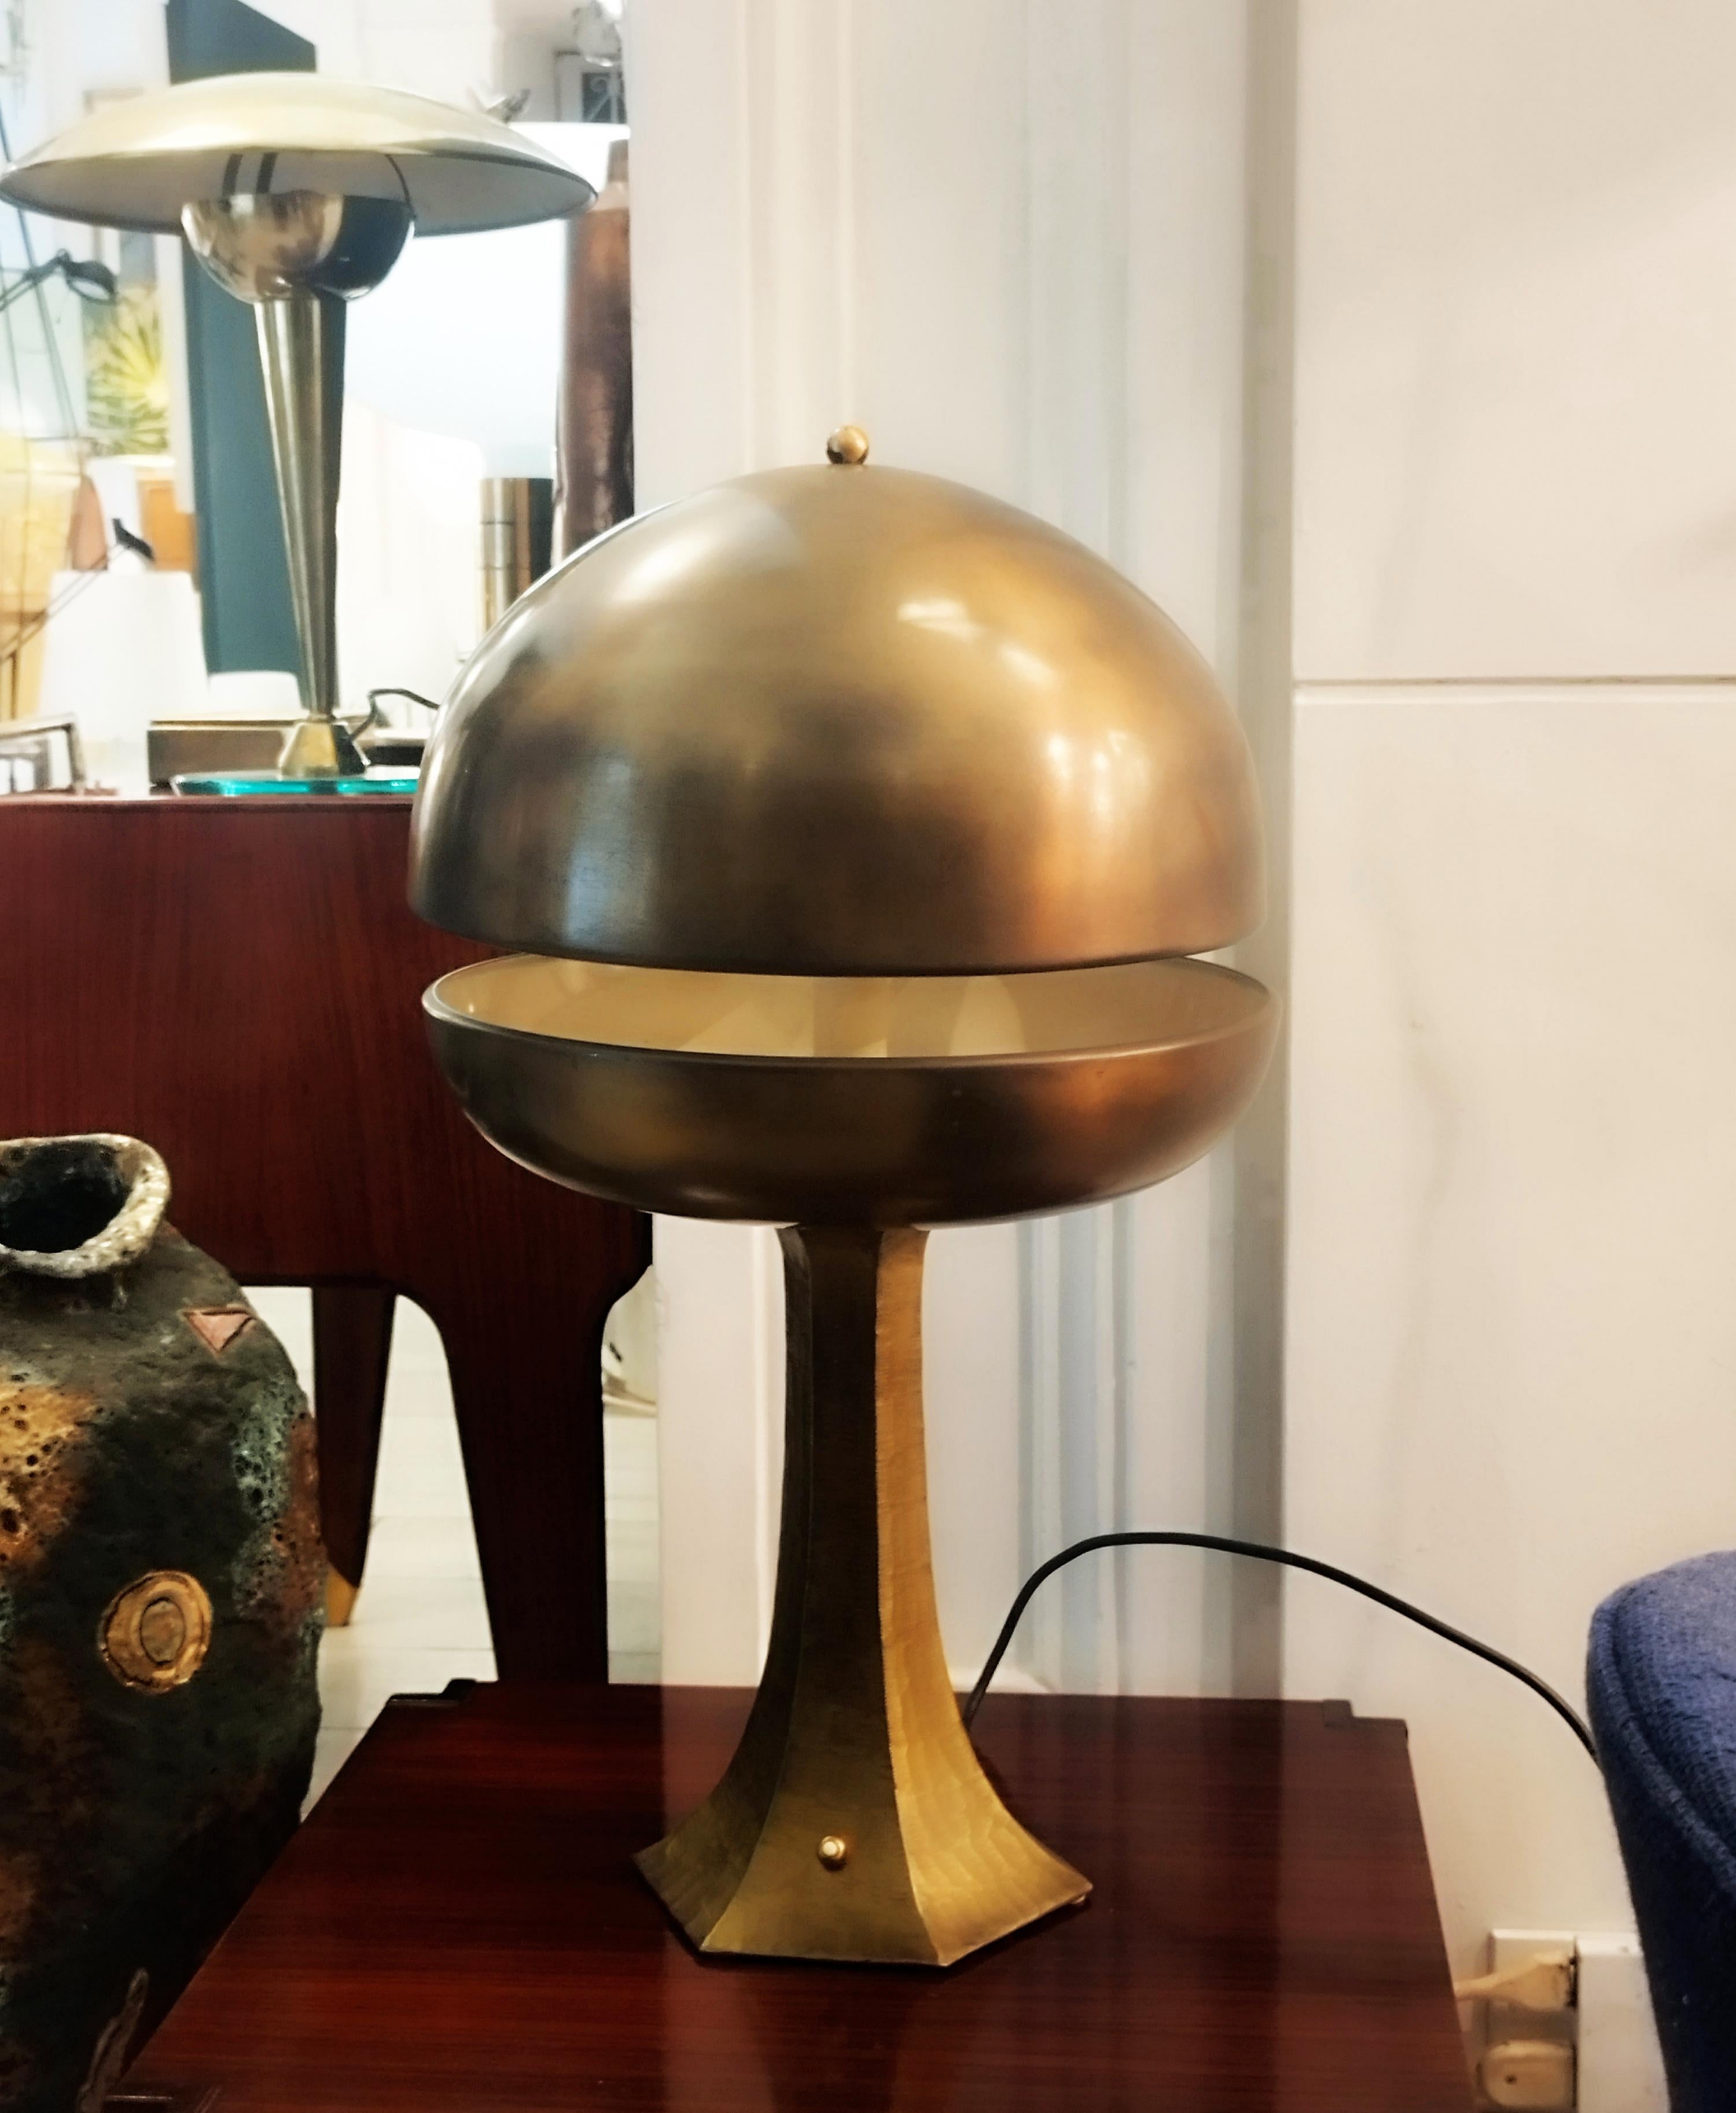 Rare large sculptural table lamp by Luciano Frigerio . Base in solid hammered brass .